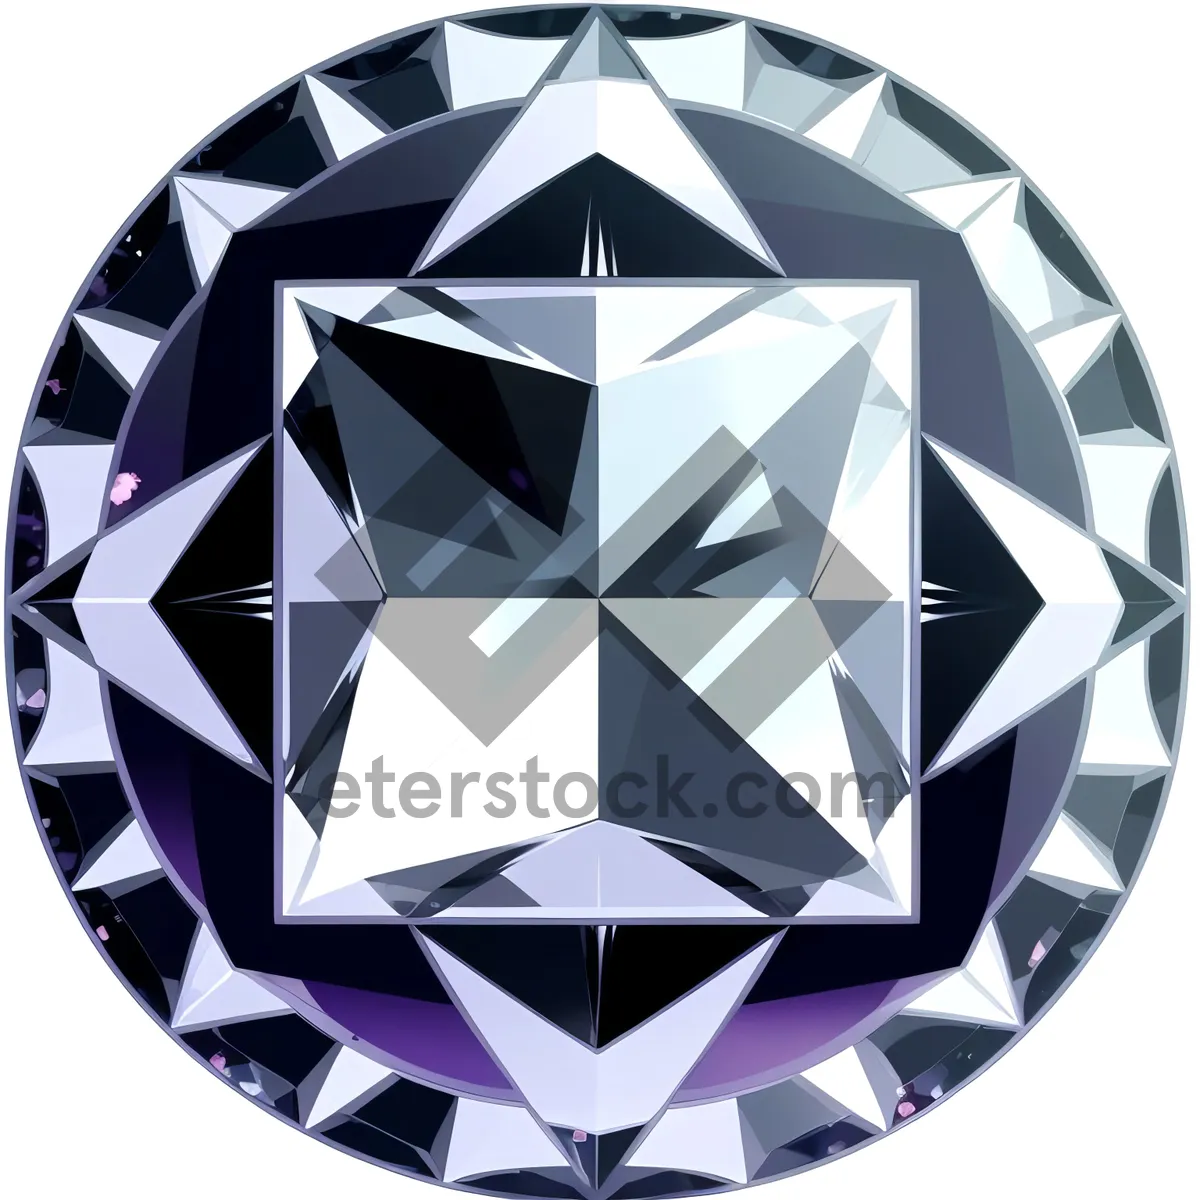 Picture of Shiny Five-Spot Gem Symbol Graphic